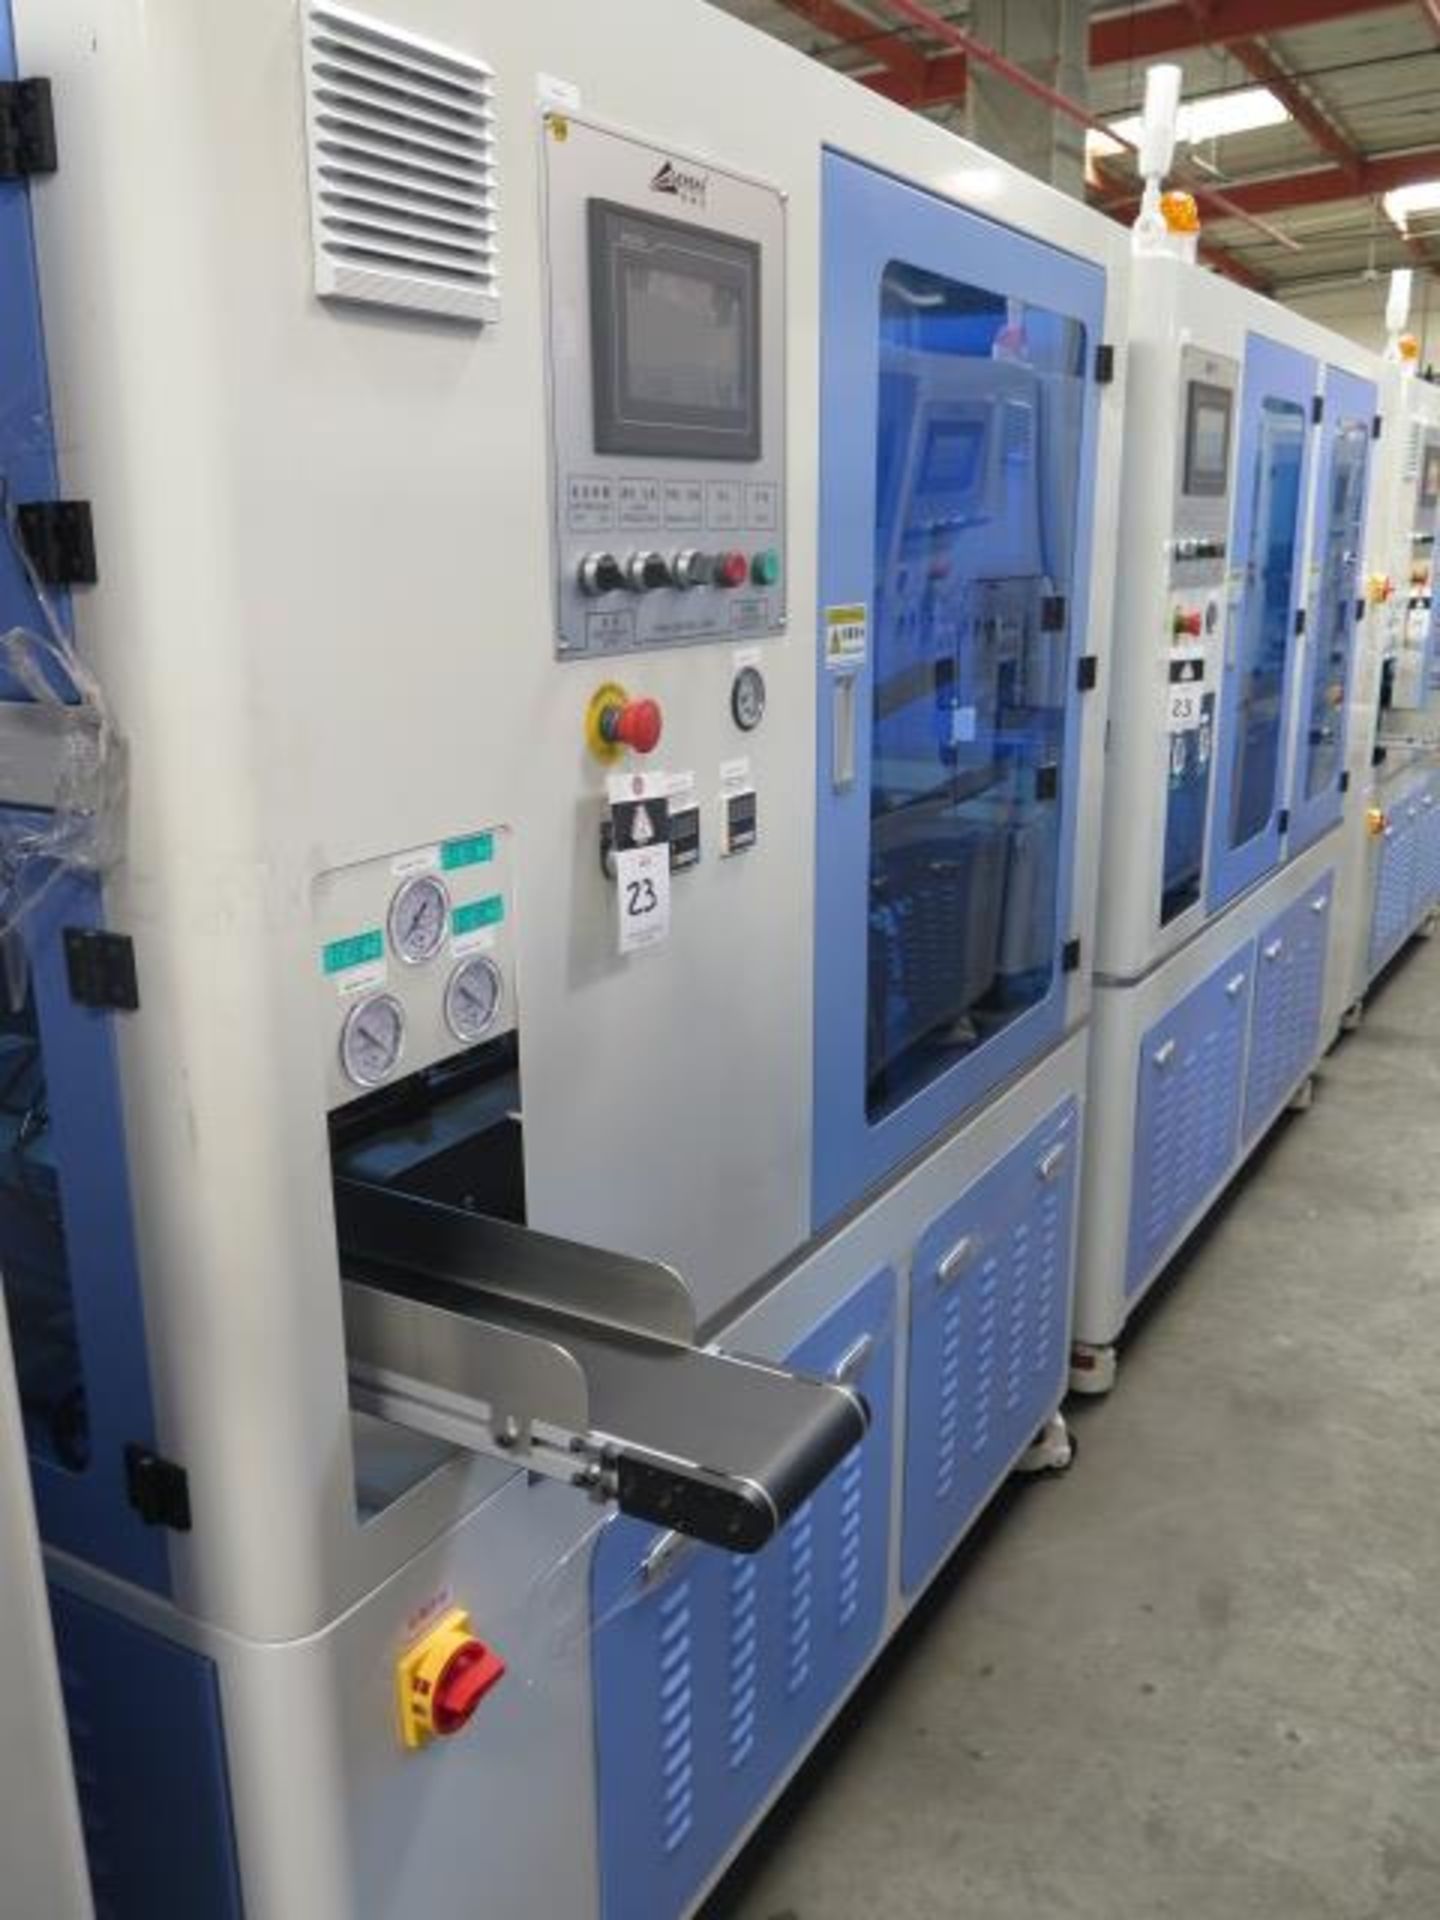 2/2021 Gereke mdl. GRK-TWO1 Cassette Assembly and Packaging Line s/n GRK20210220026, SOLD AS IS